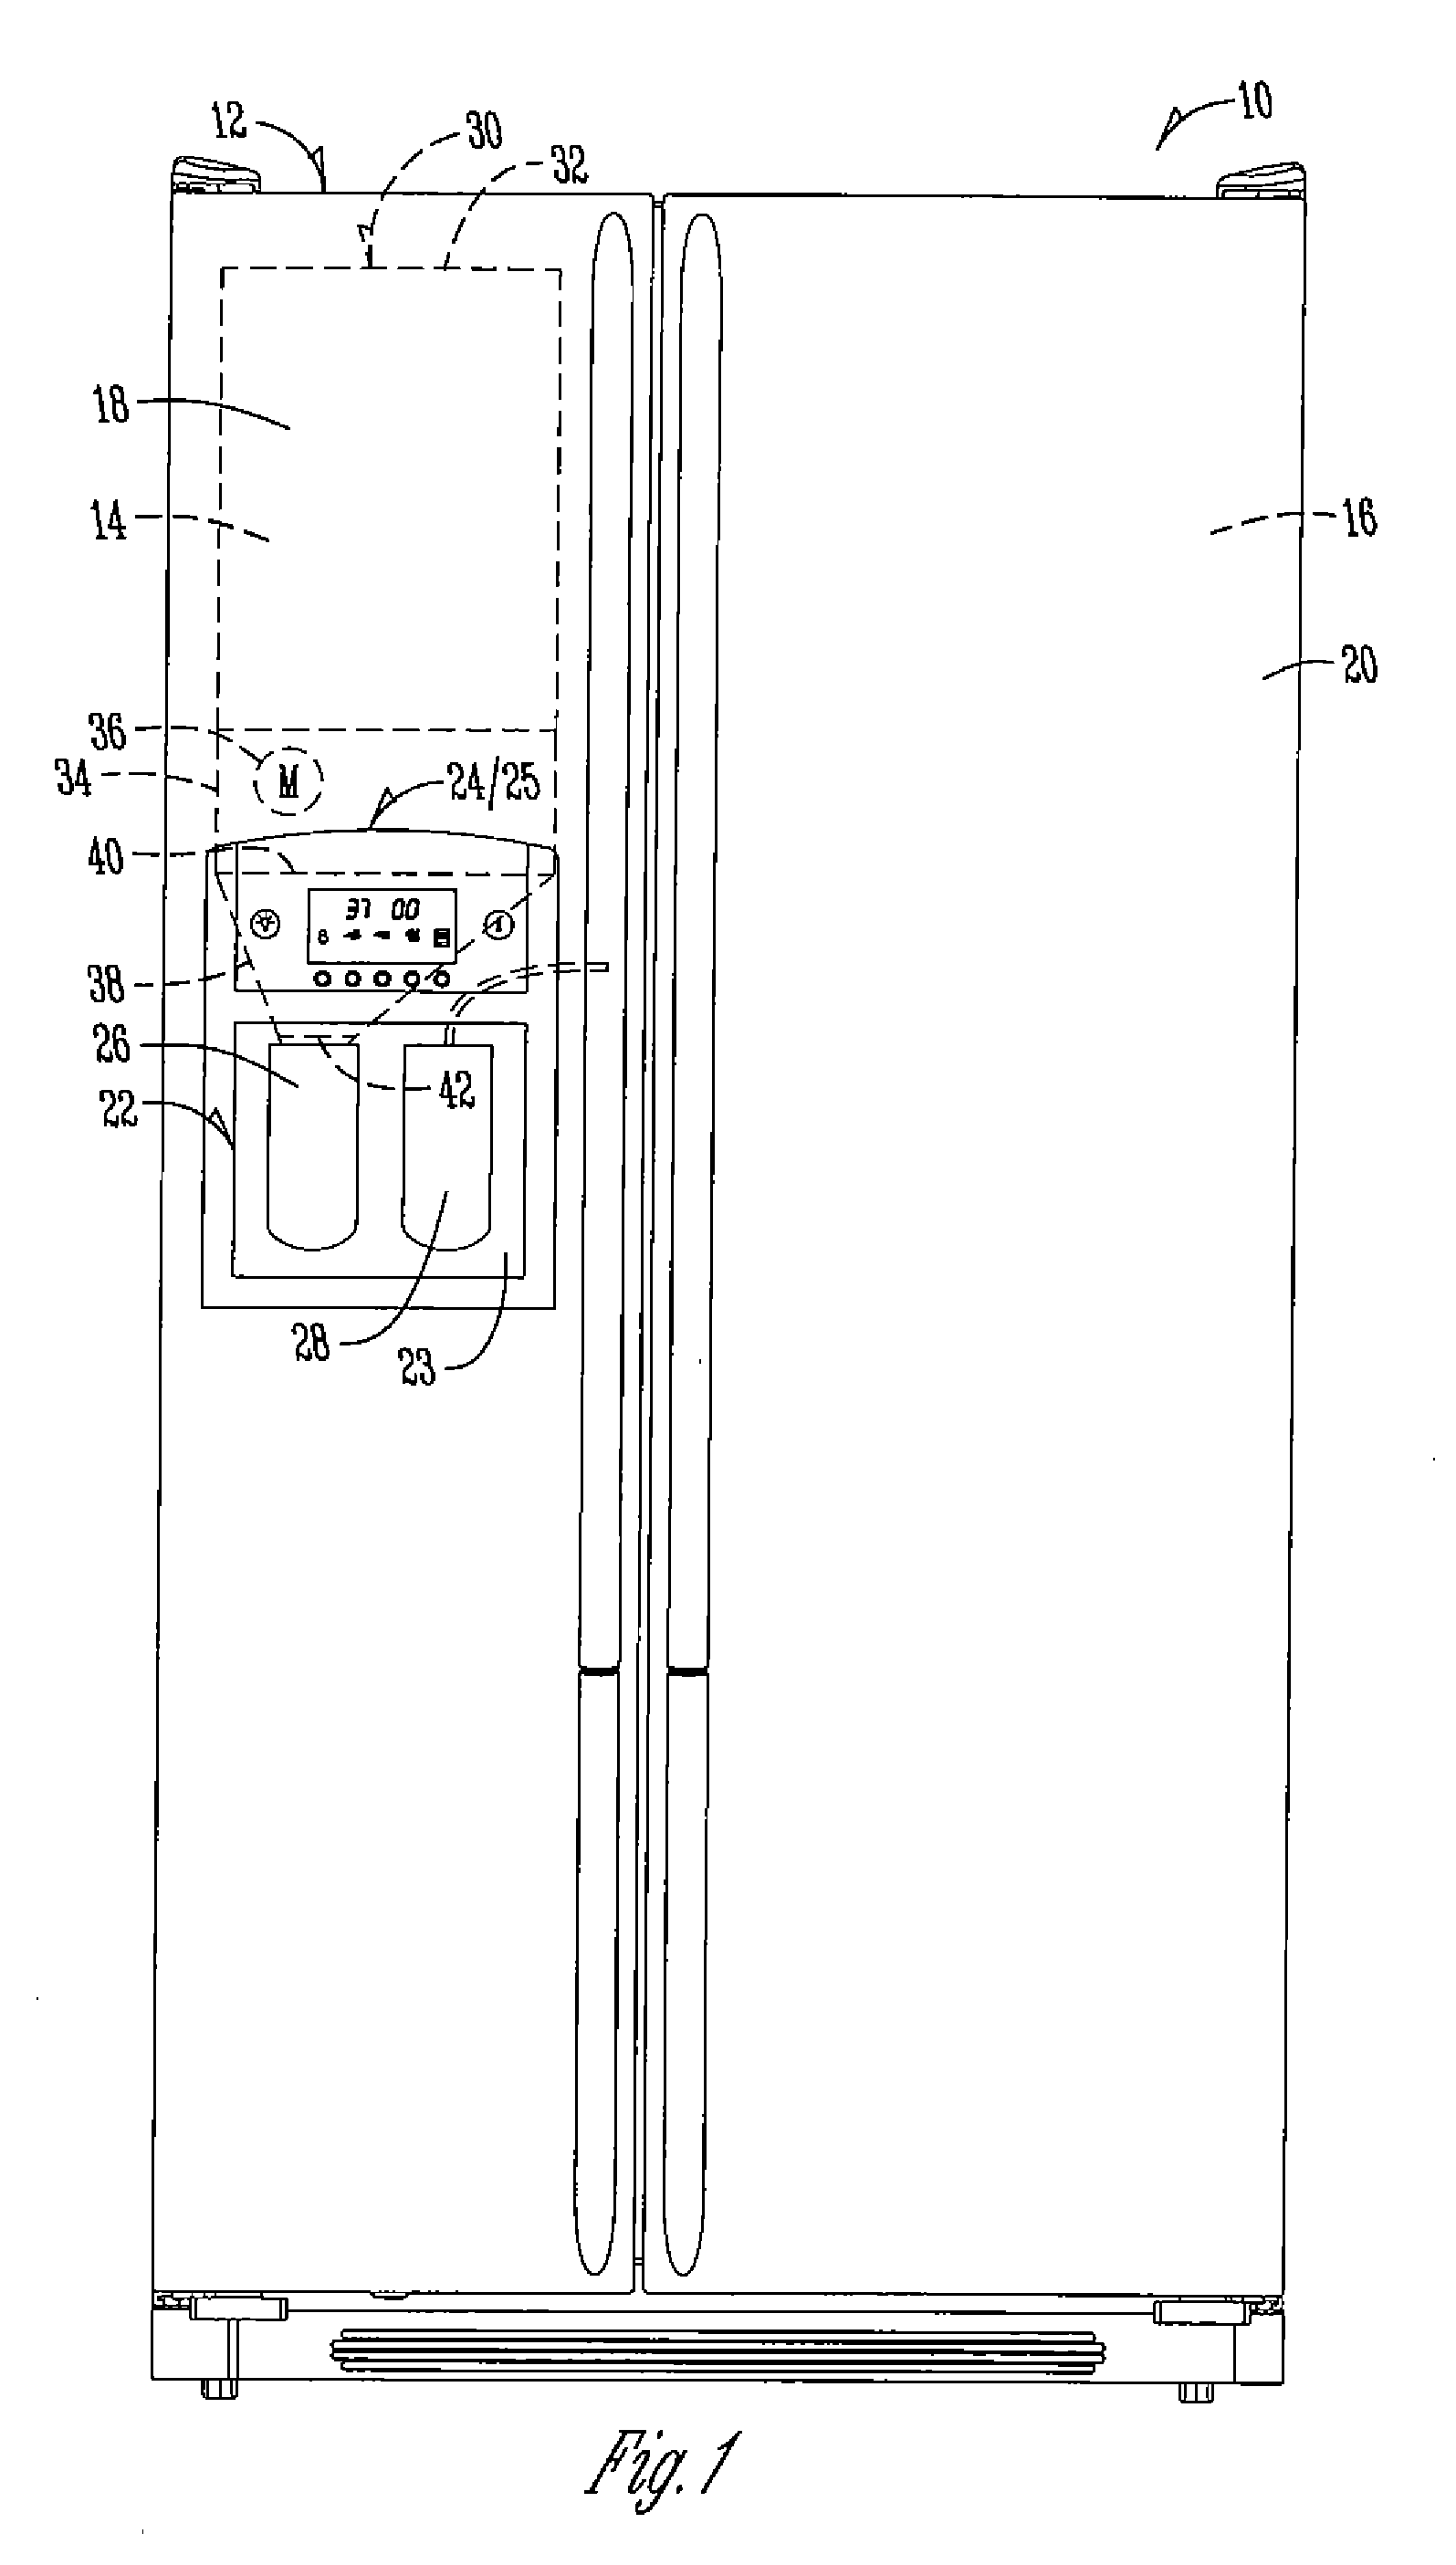 Apparatus, method, and system for automatically turning off an actuator in a refrigeration device upon detection of an unwanted condition